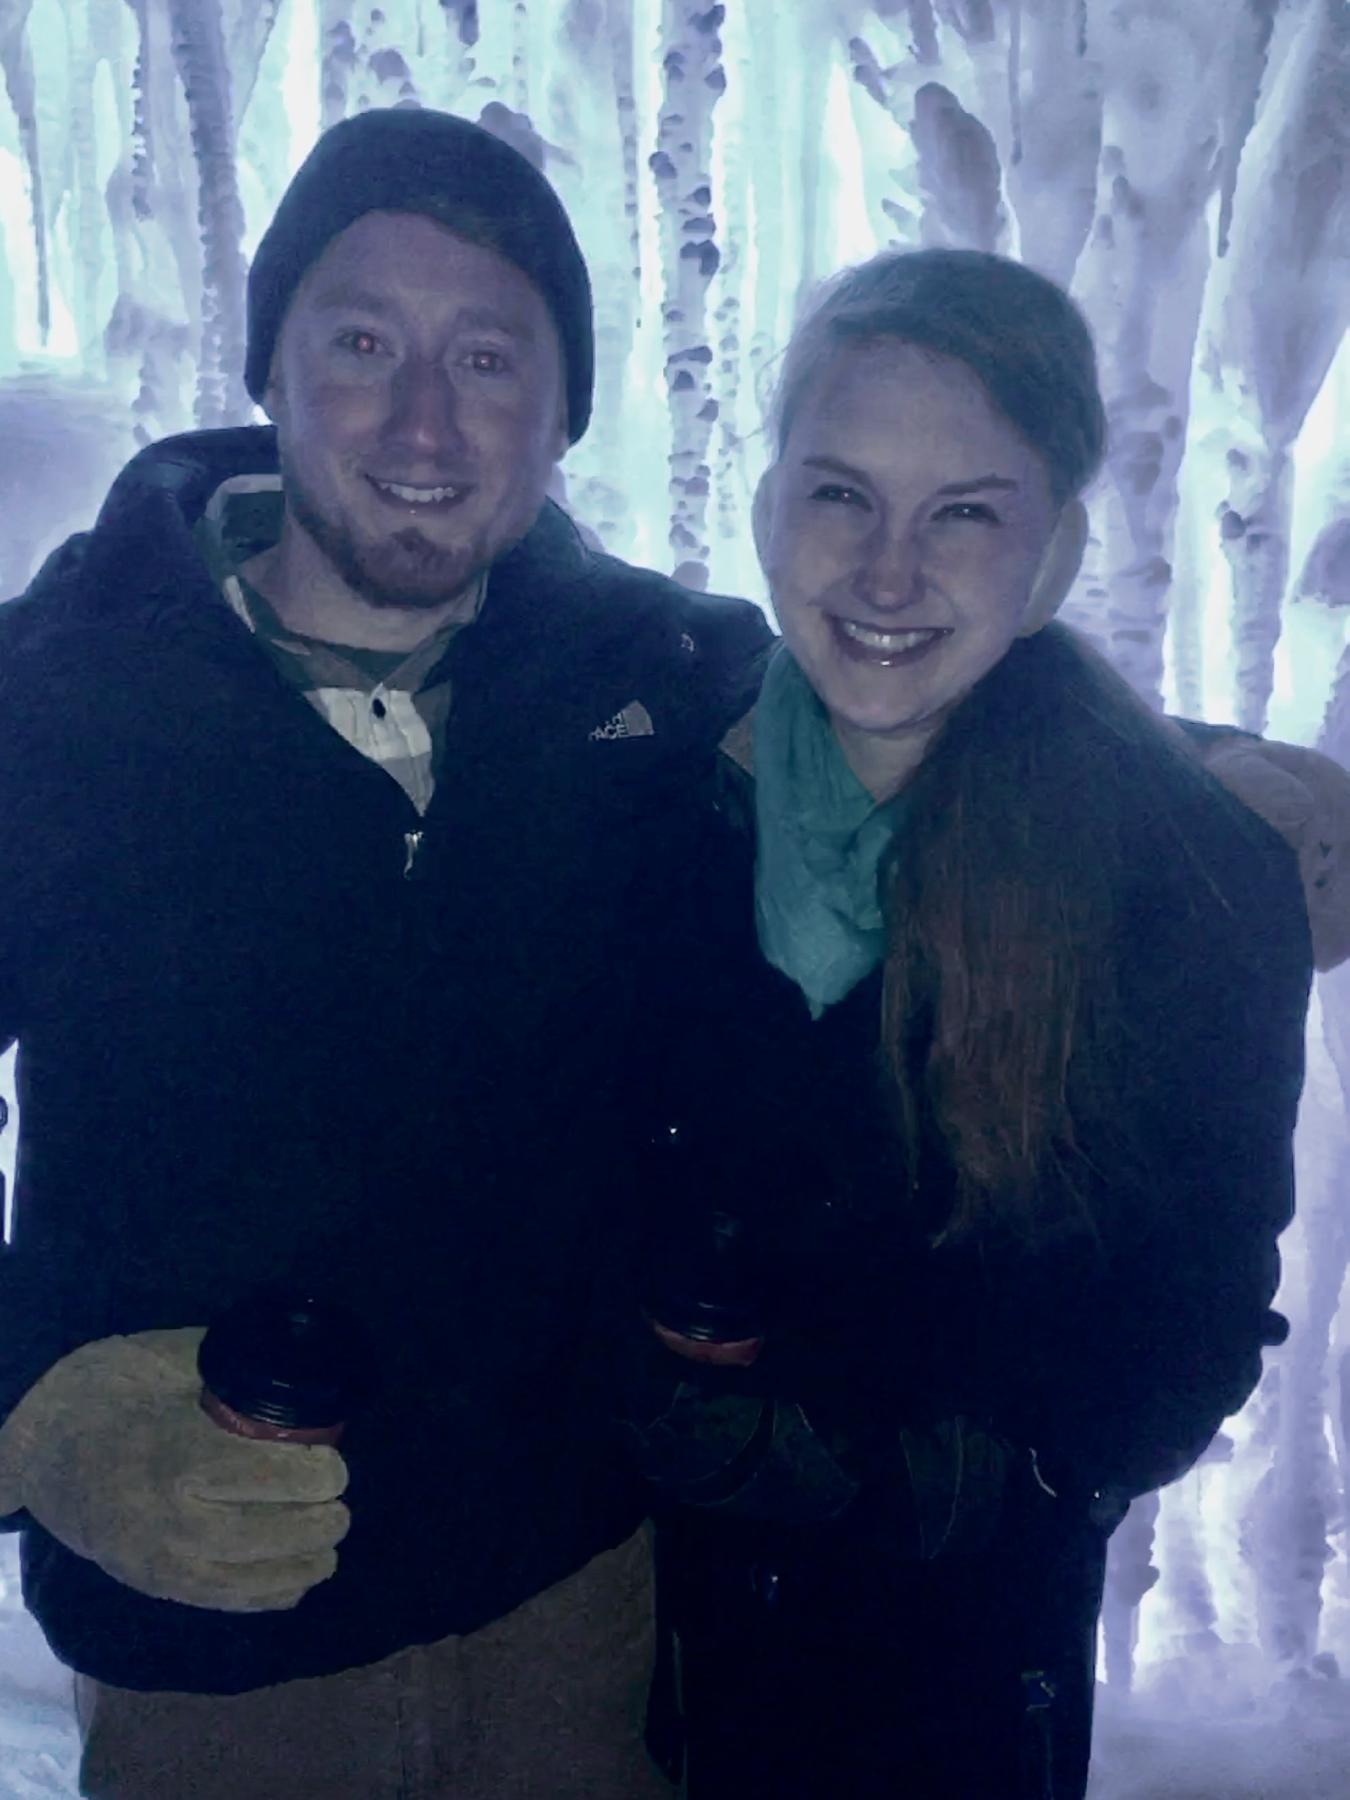 Our first date. Drove up to Stillwater to see the Ice Castles.